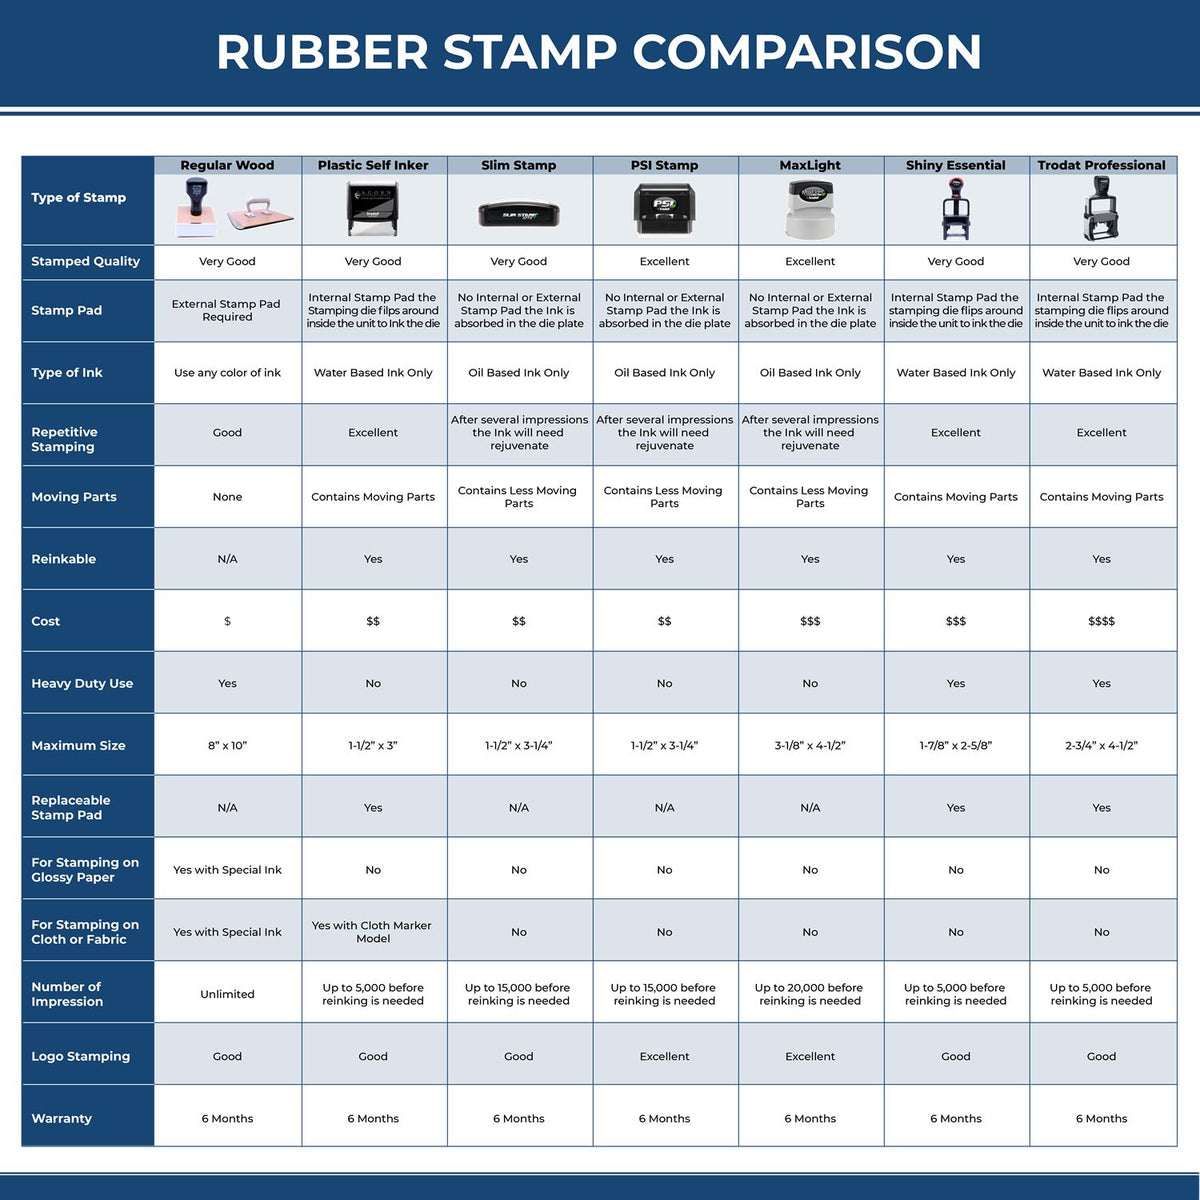 A comparison chart for the different types of mount models available for the Wooden Handle Montana State Seal Notary Public Stamp.